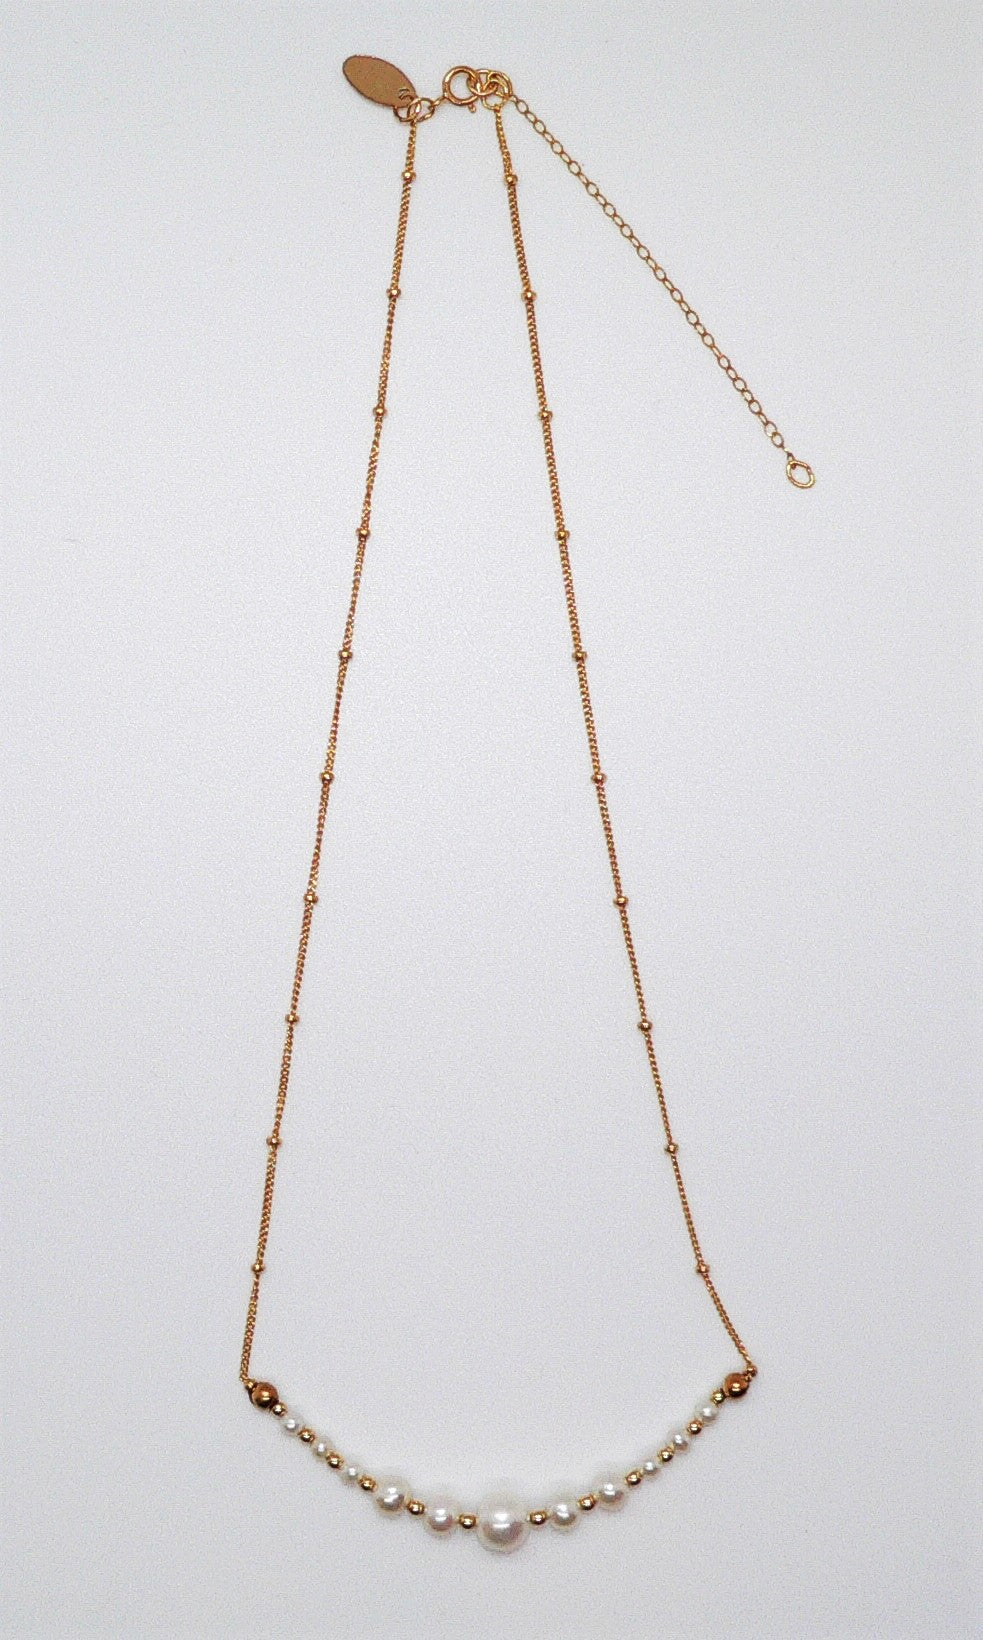 Pearl & 14K gold-filled satellite chain necklaces (2 styles)